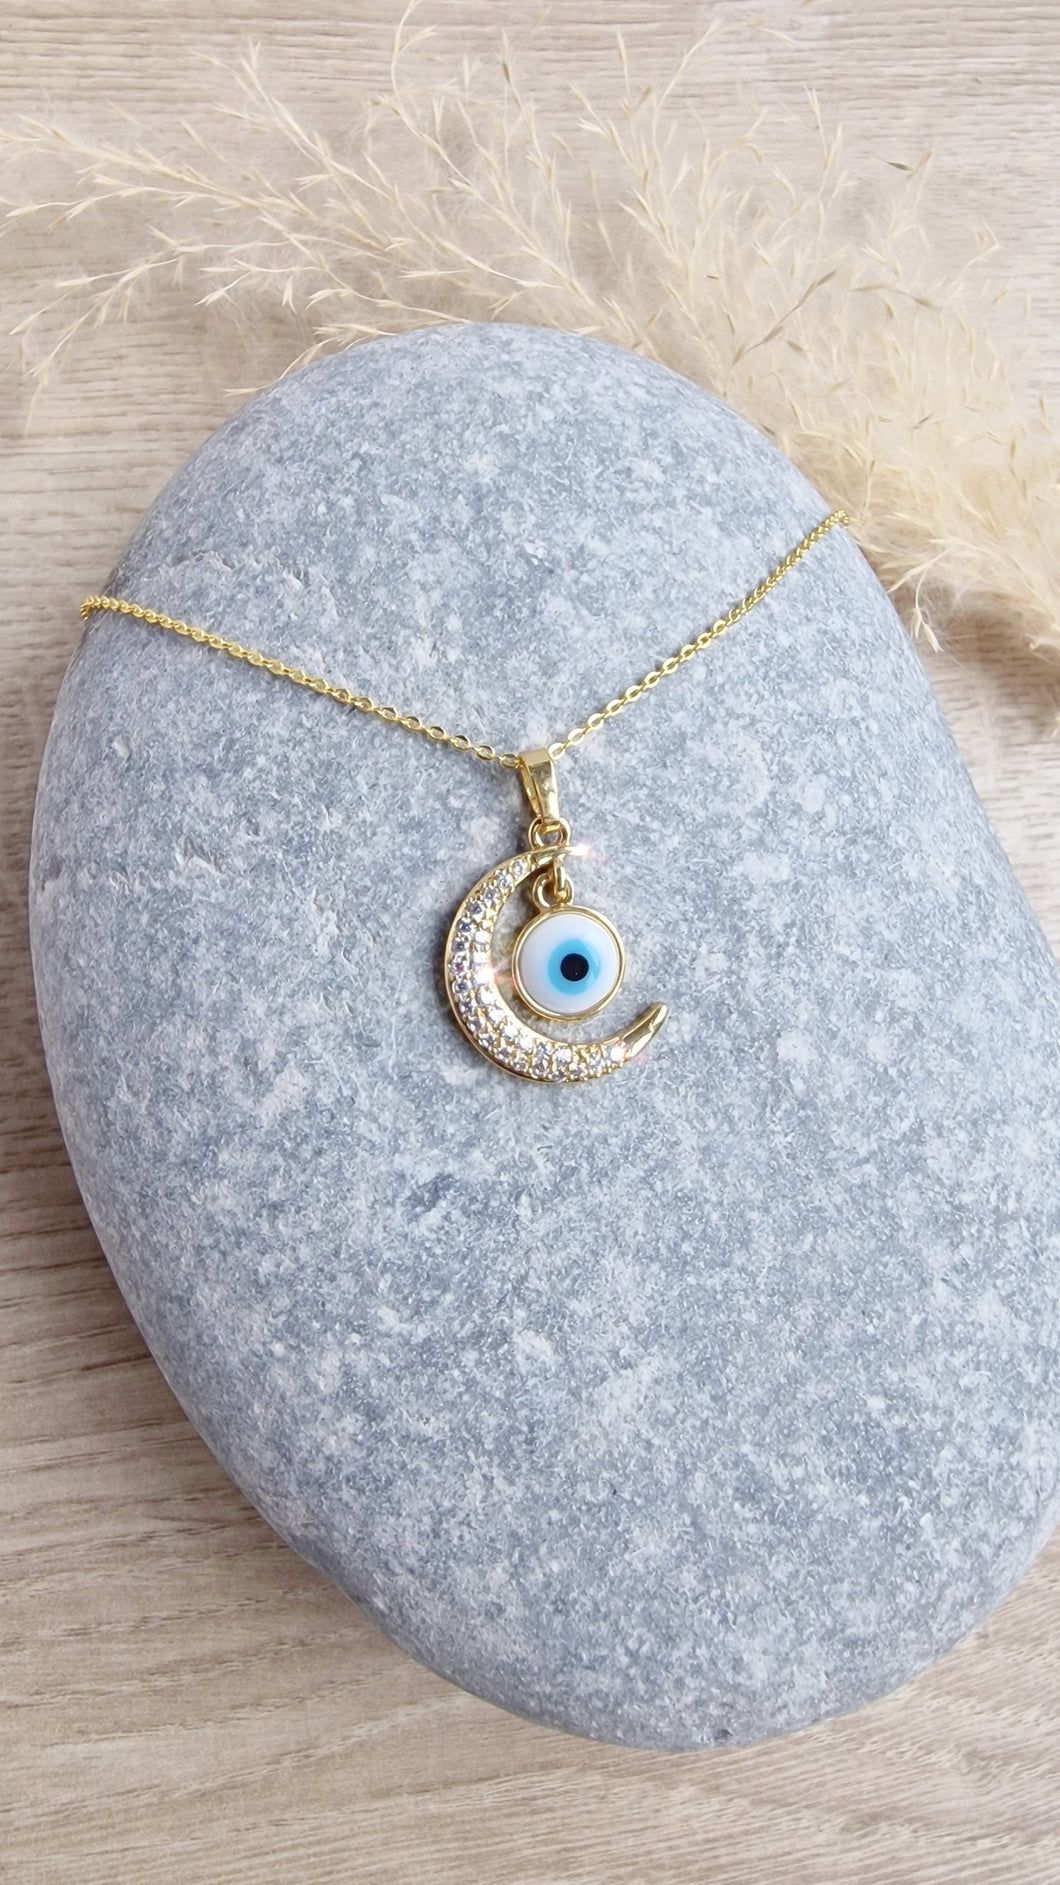 Evil eye moon necklace with simple chain